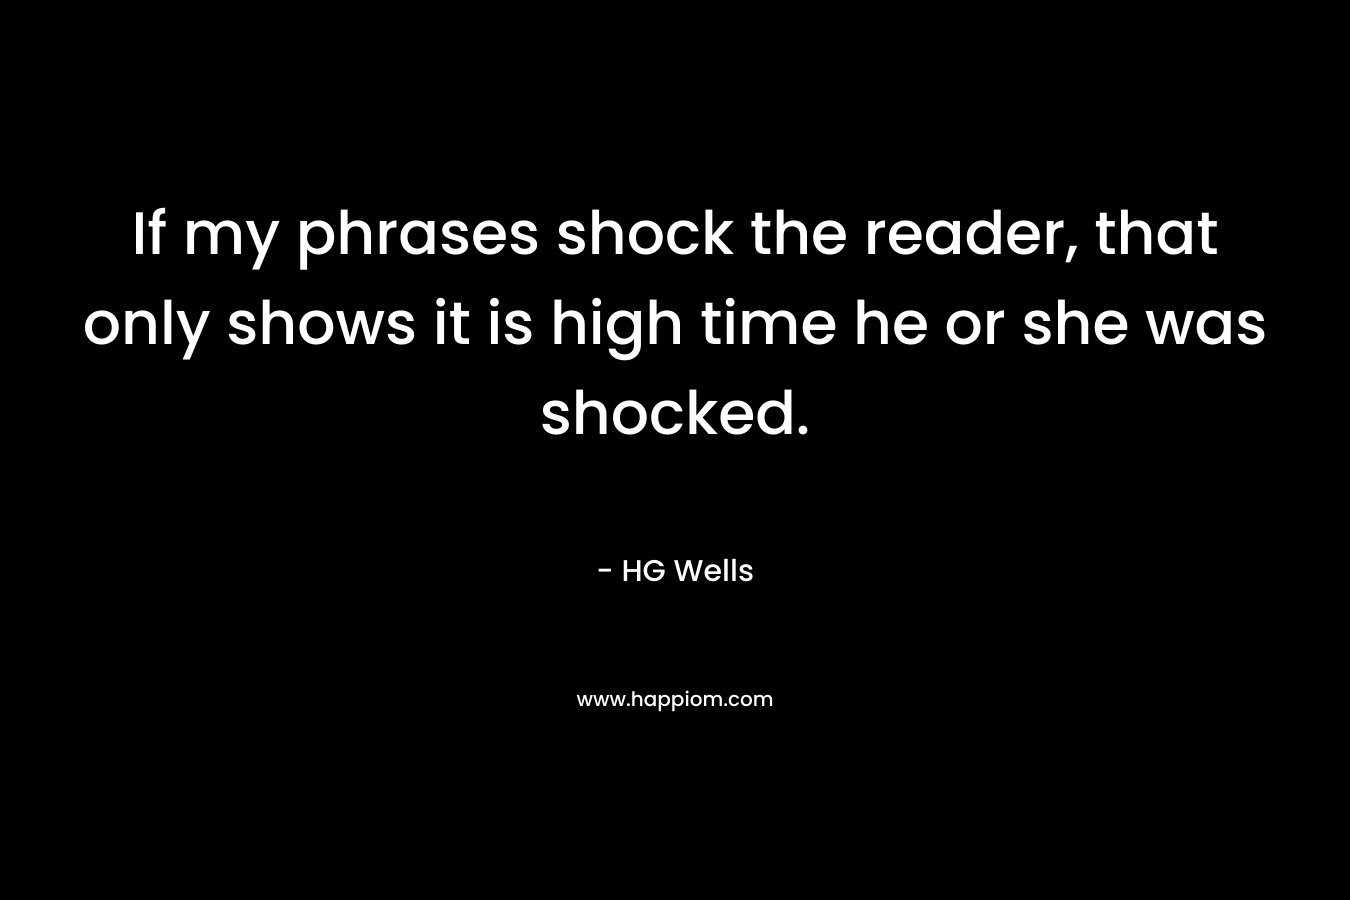 If my phrases shock the reader, that only shows it is high time he or she was shocked. – HG Wells